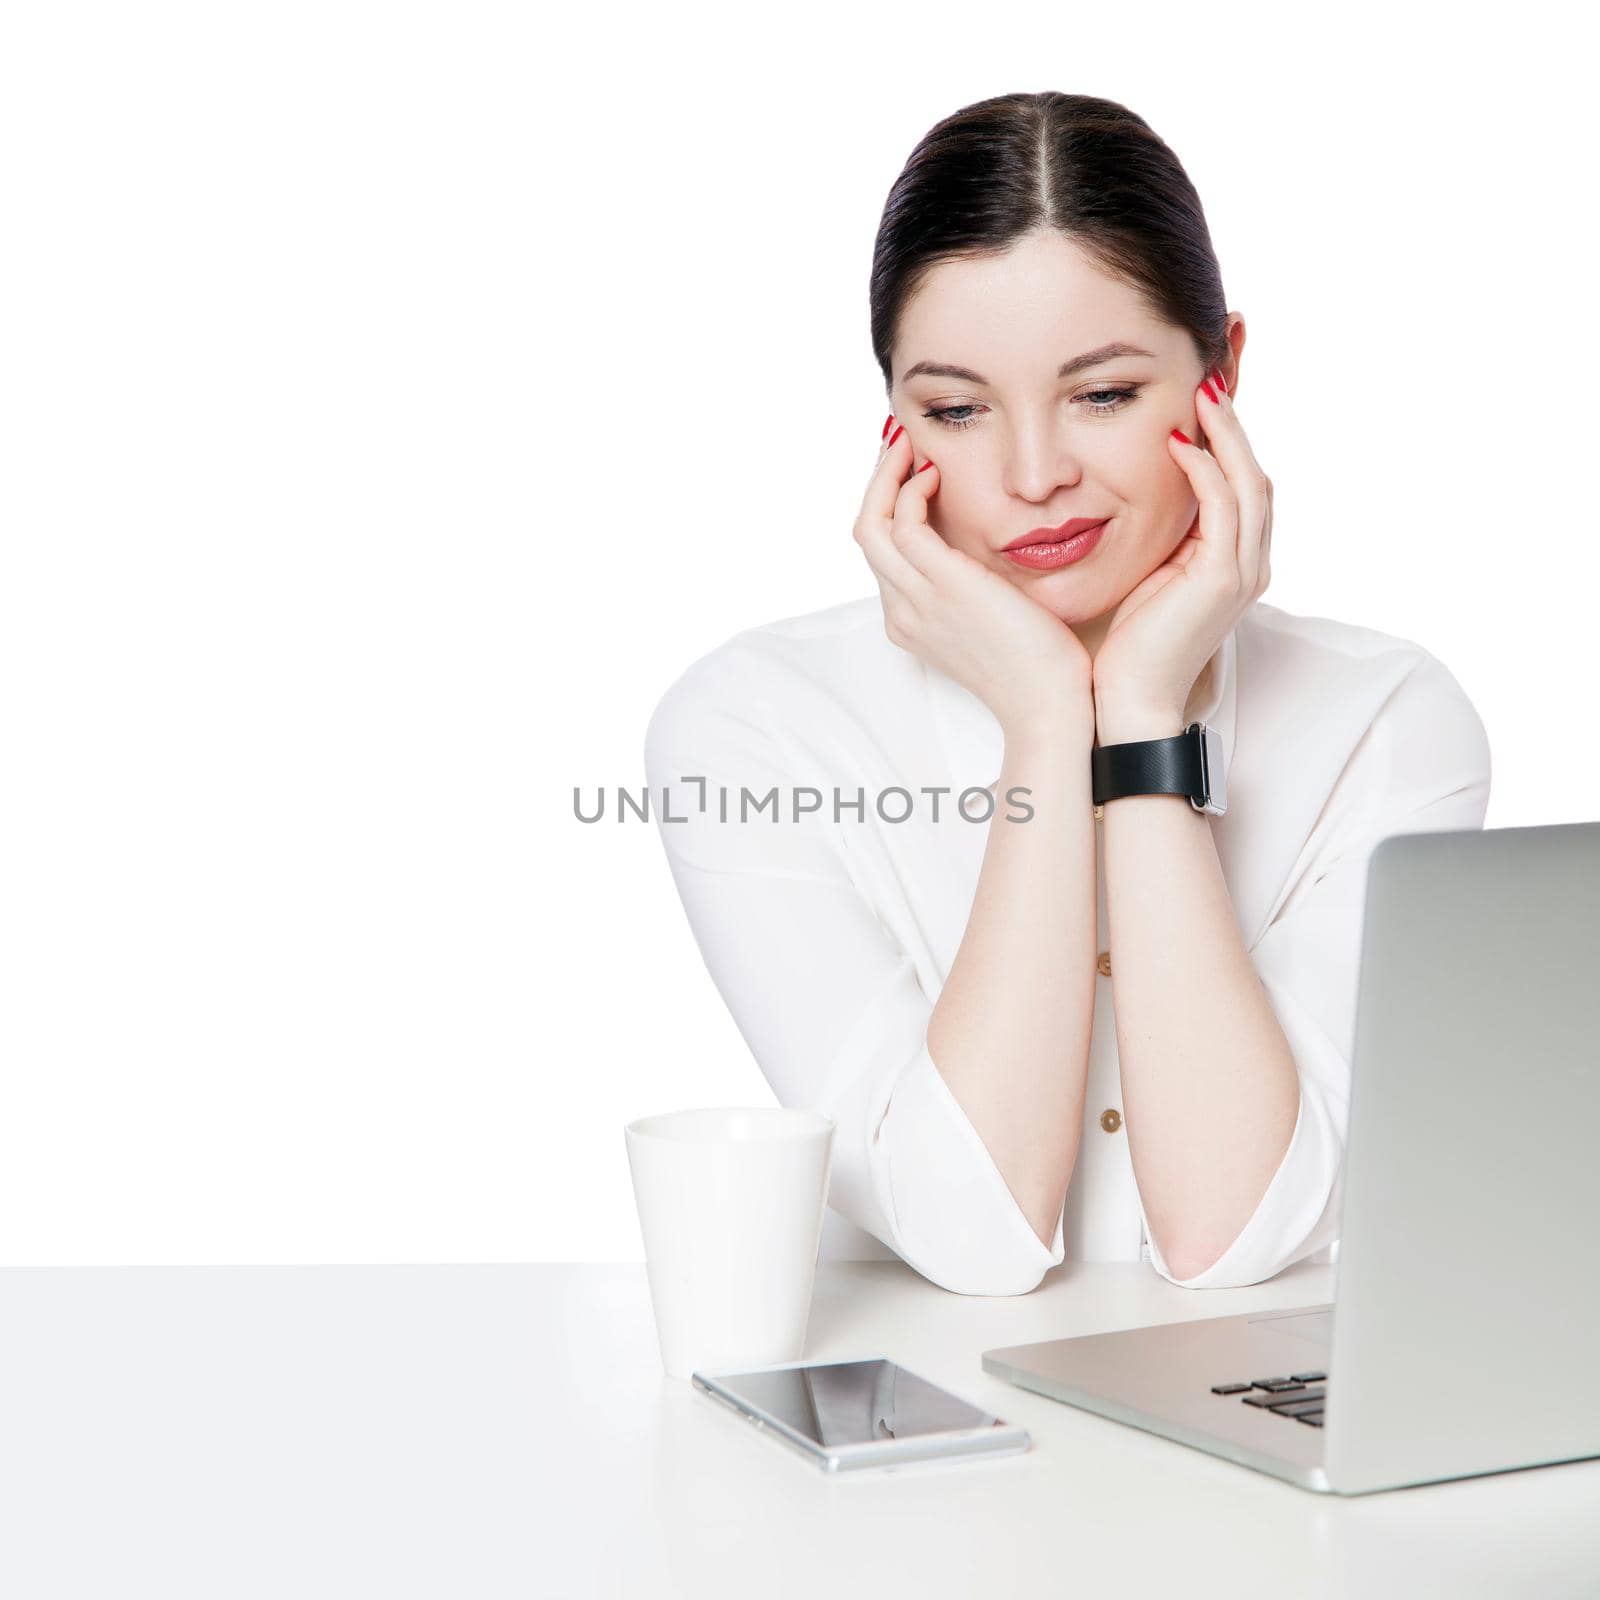 Portrait of dissatisfied or sad brunette businesswoman in white shirt sitting with laptop touching her face and thinking or confused and thinking. indoor studio shot, isolated in white background.